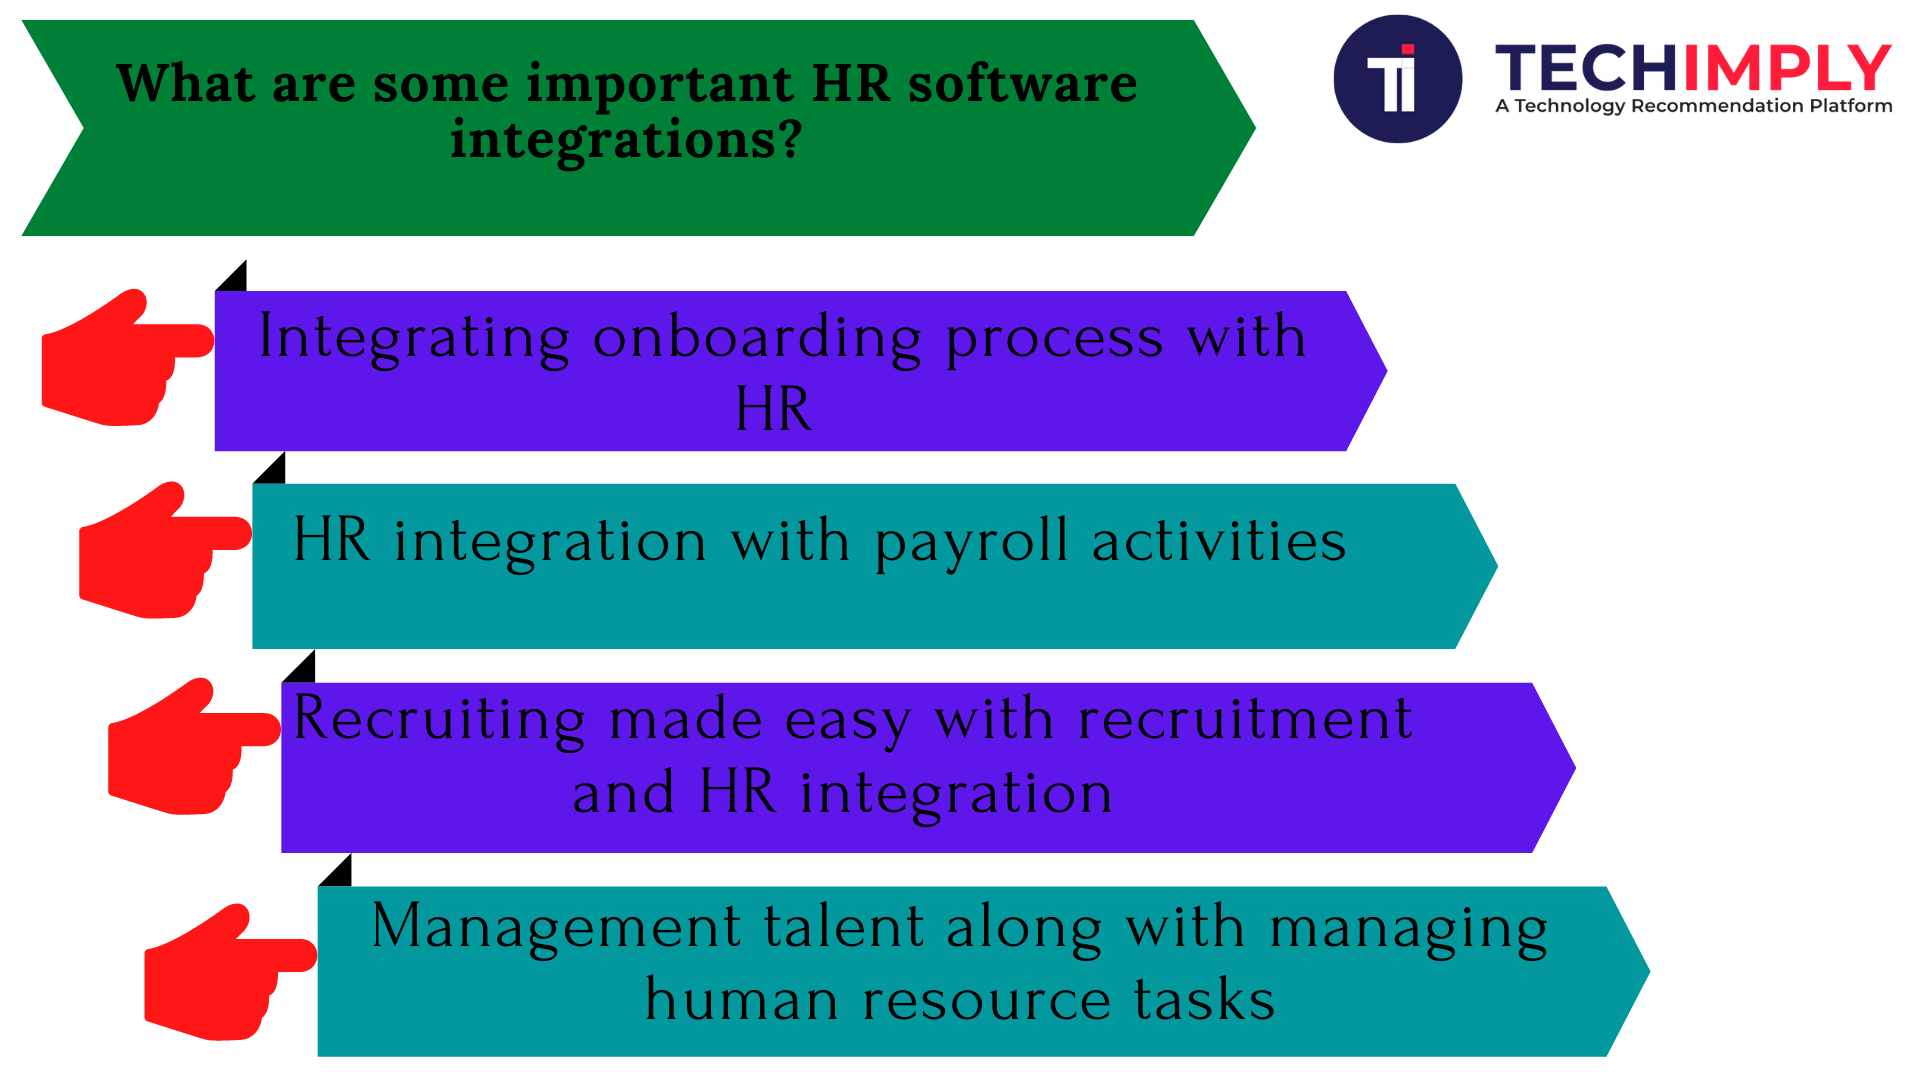 What are some important HR software integrations?